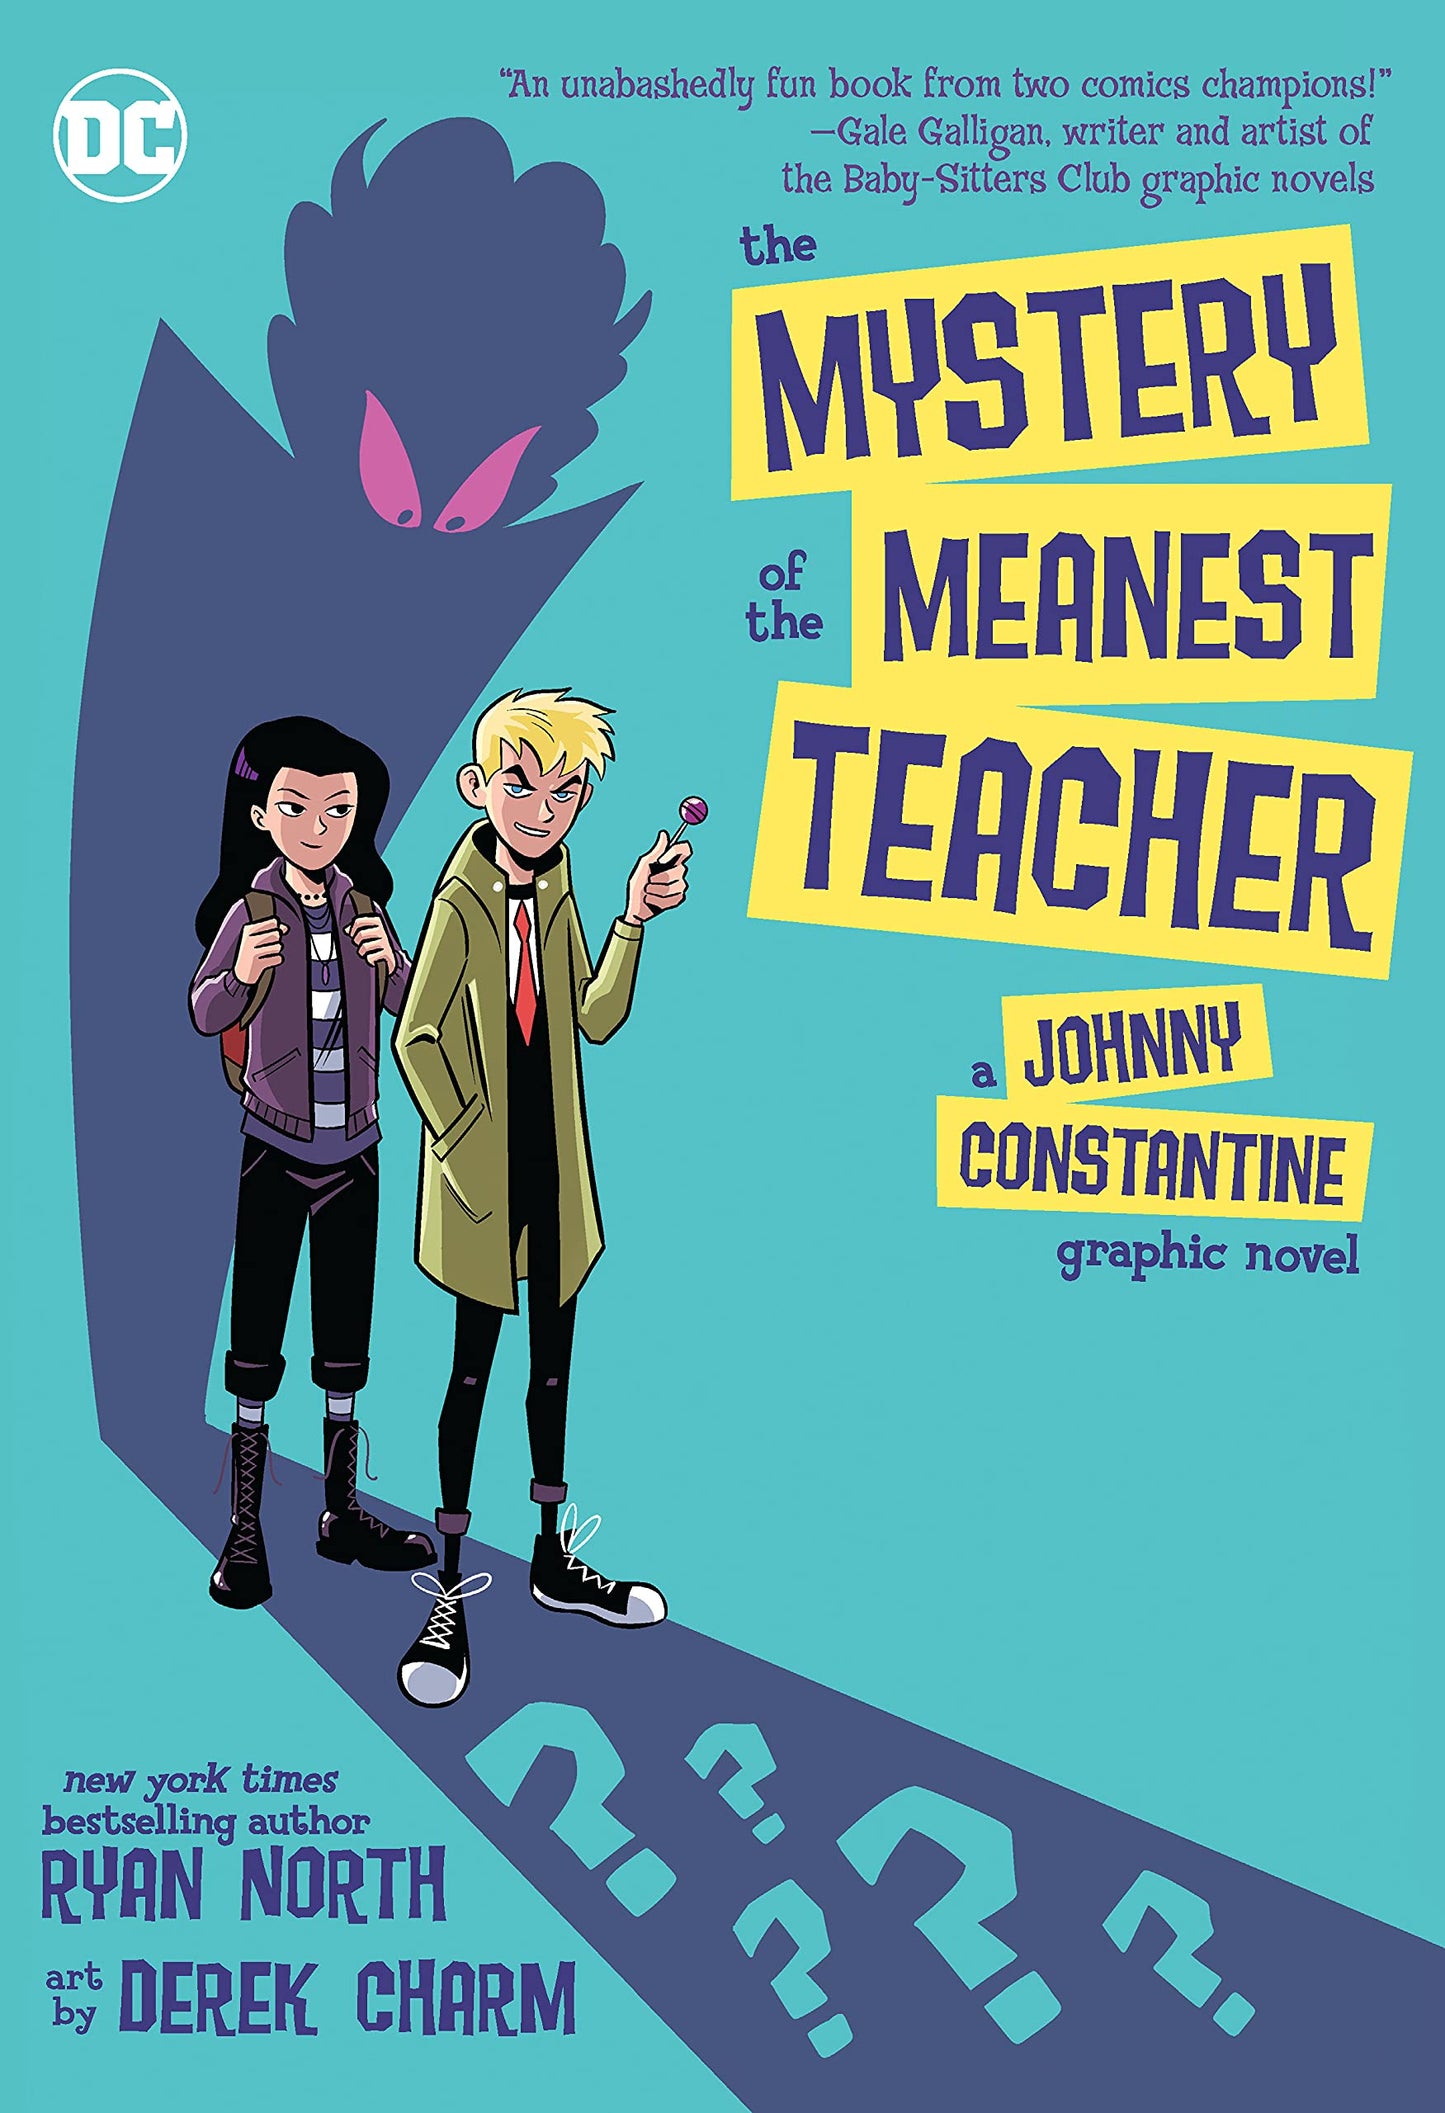 Mystery of the Meanest Teacher: A Johnny Constantine Graphic Novel